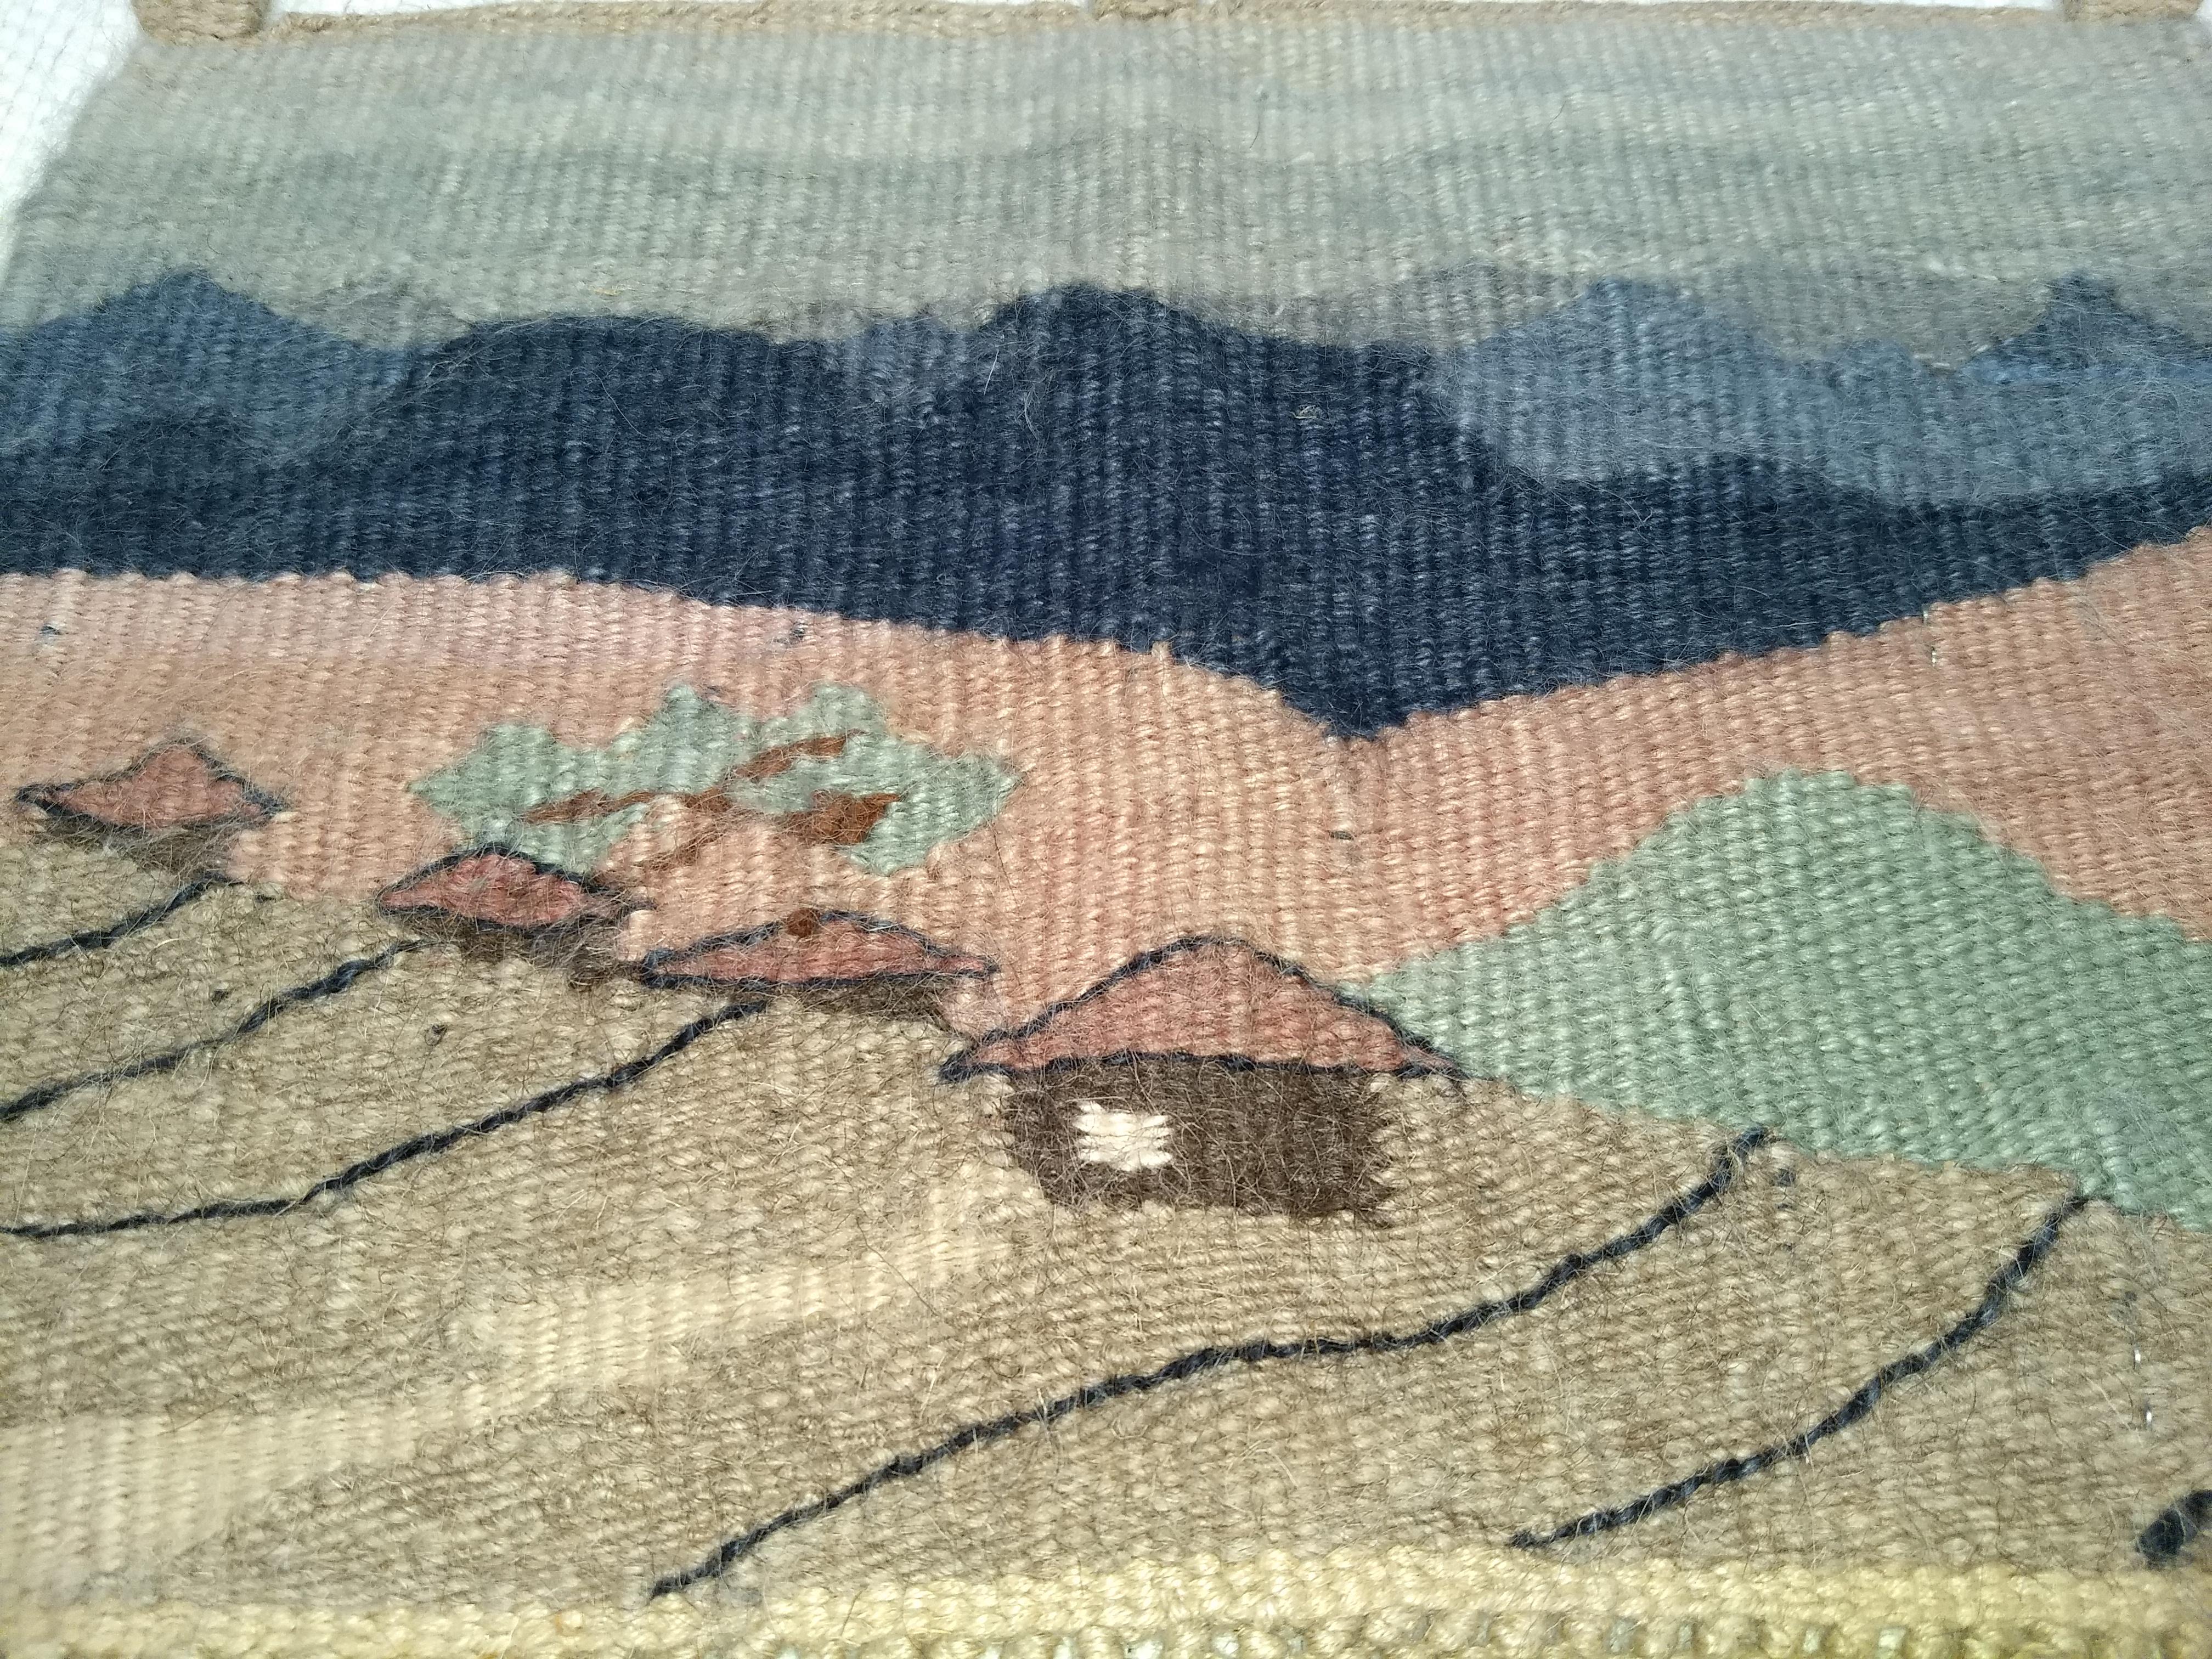 This African Handwoven Tapestry is a beautiful tribal art created by the artisans in the Kingdom of Lesotho, Africa.  The African Handwoven Tapestry depicts a village scene on the foothills and the mountains in the distance.    The use of the